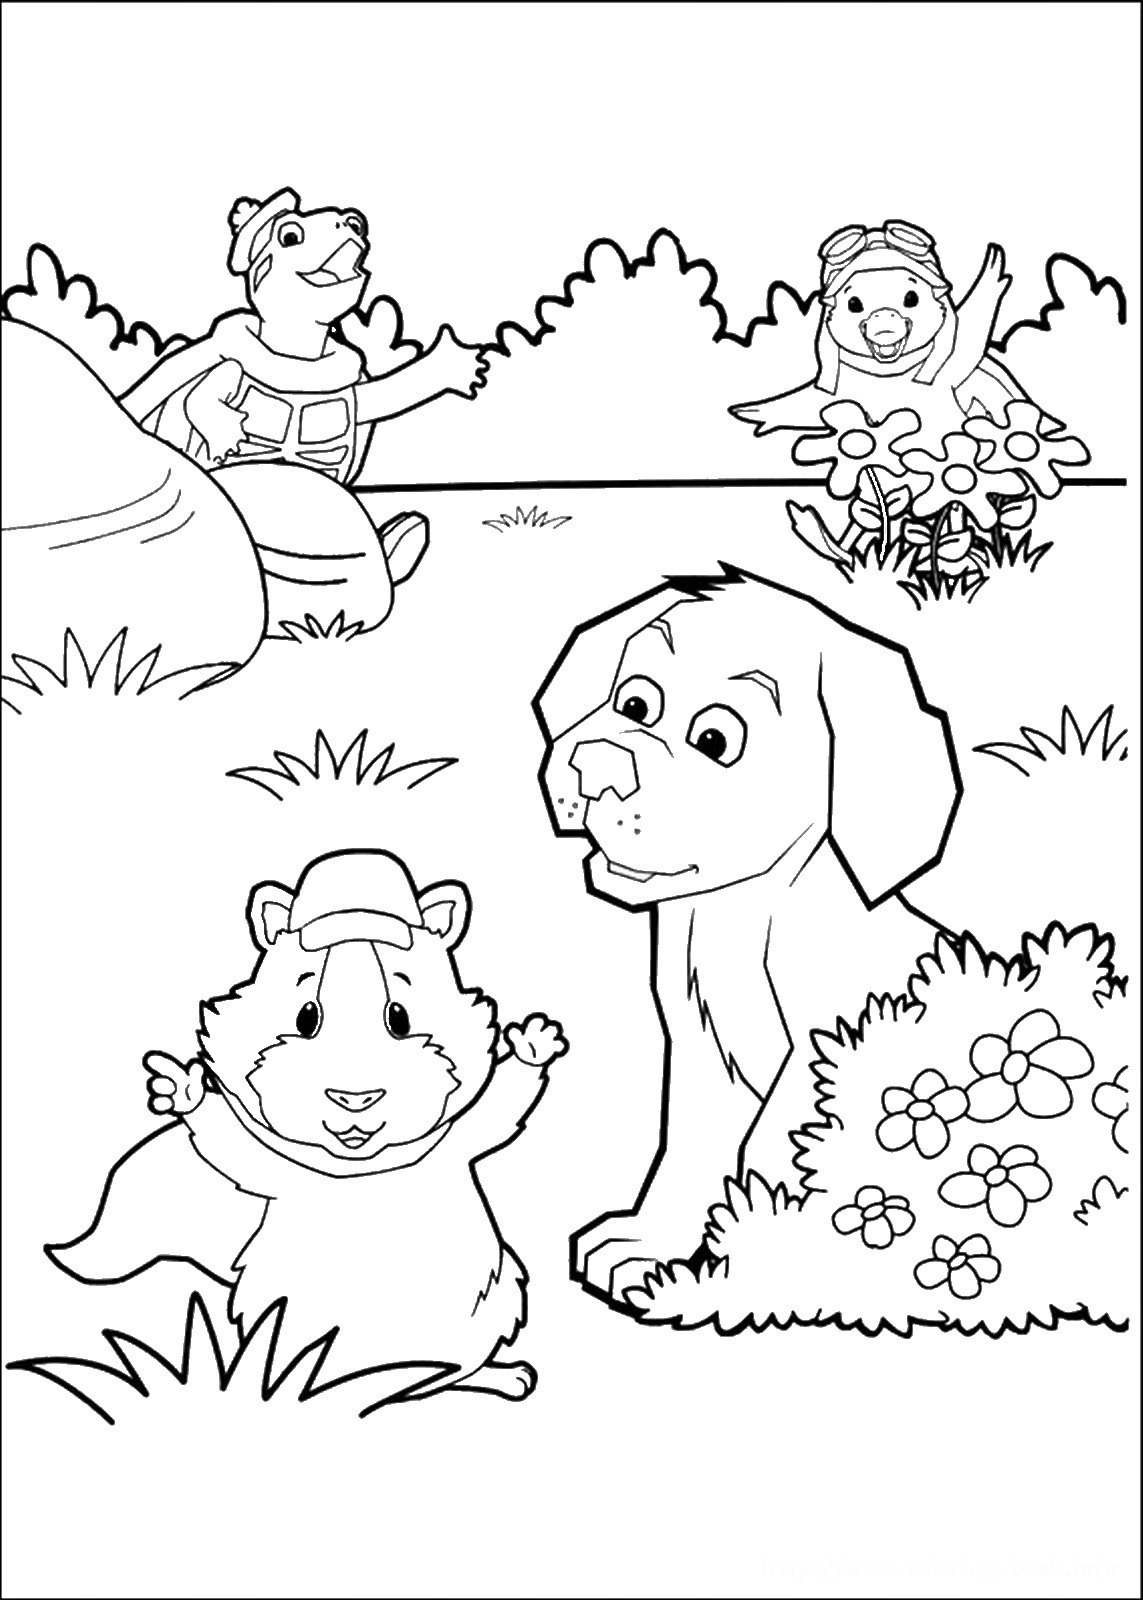  Wonder Pets Coloring Pages To Print 3